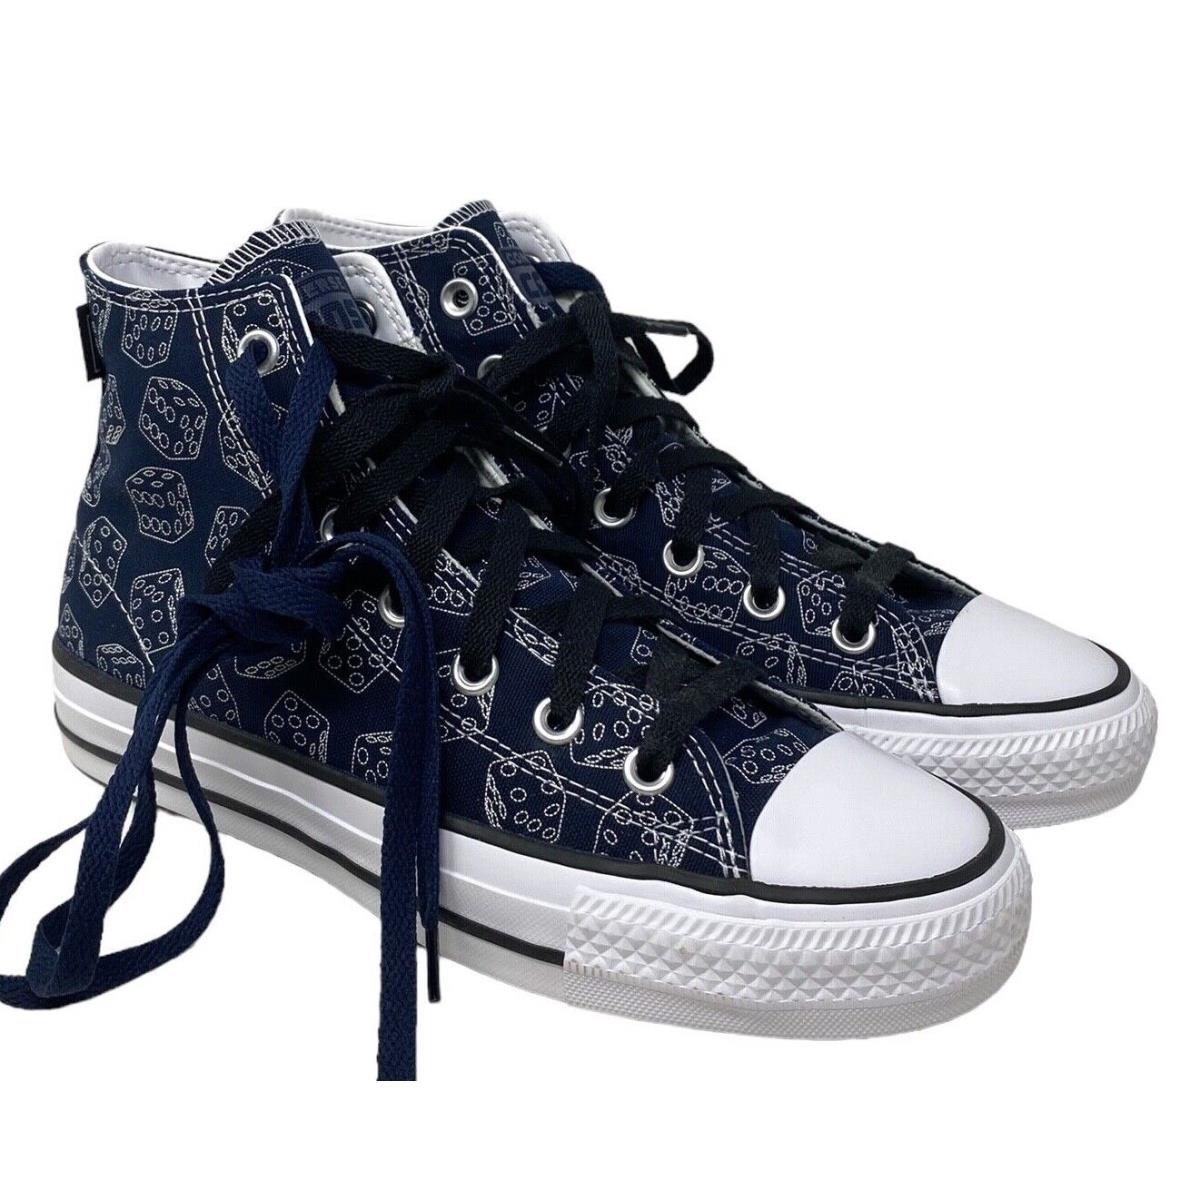 Converse Cons Chuck Taylor Pro High Top Casual Women Sneakers Shoes Navy A03222C